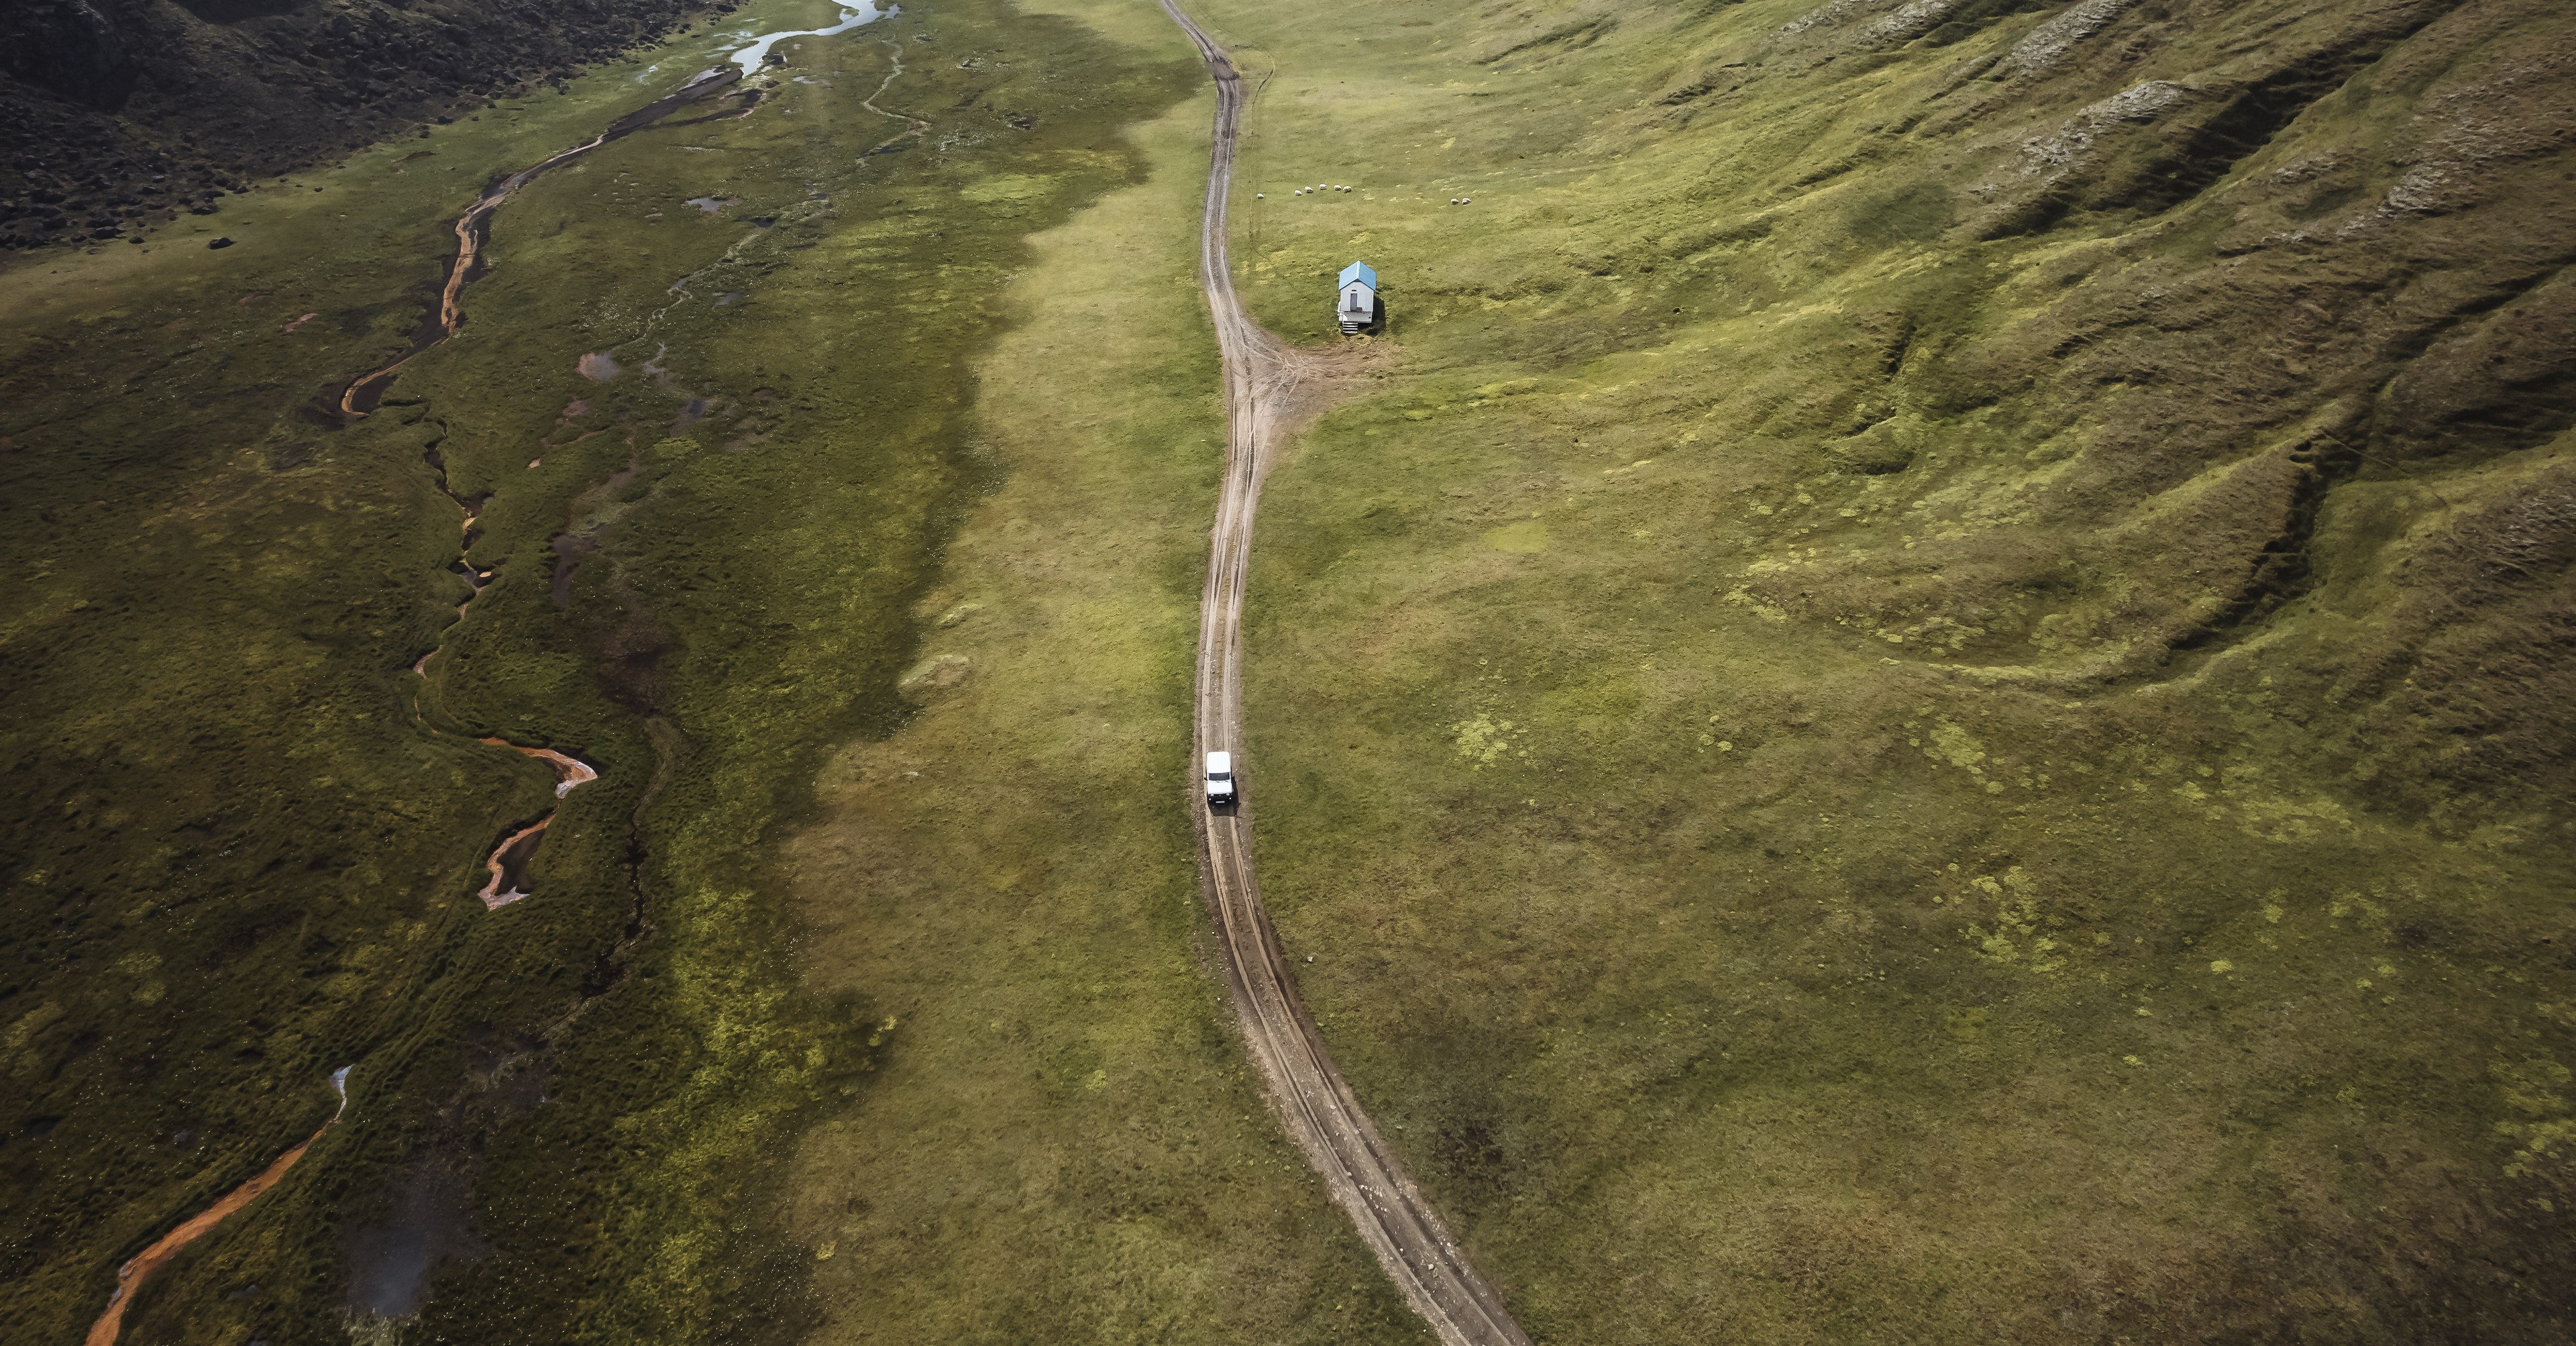 Rental Car from Go Car Rental driving on a gravel road in Iceland